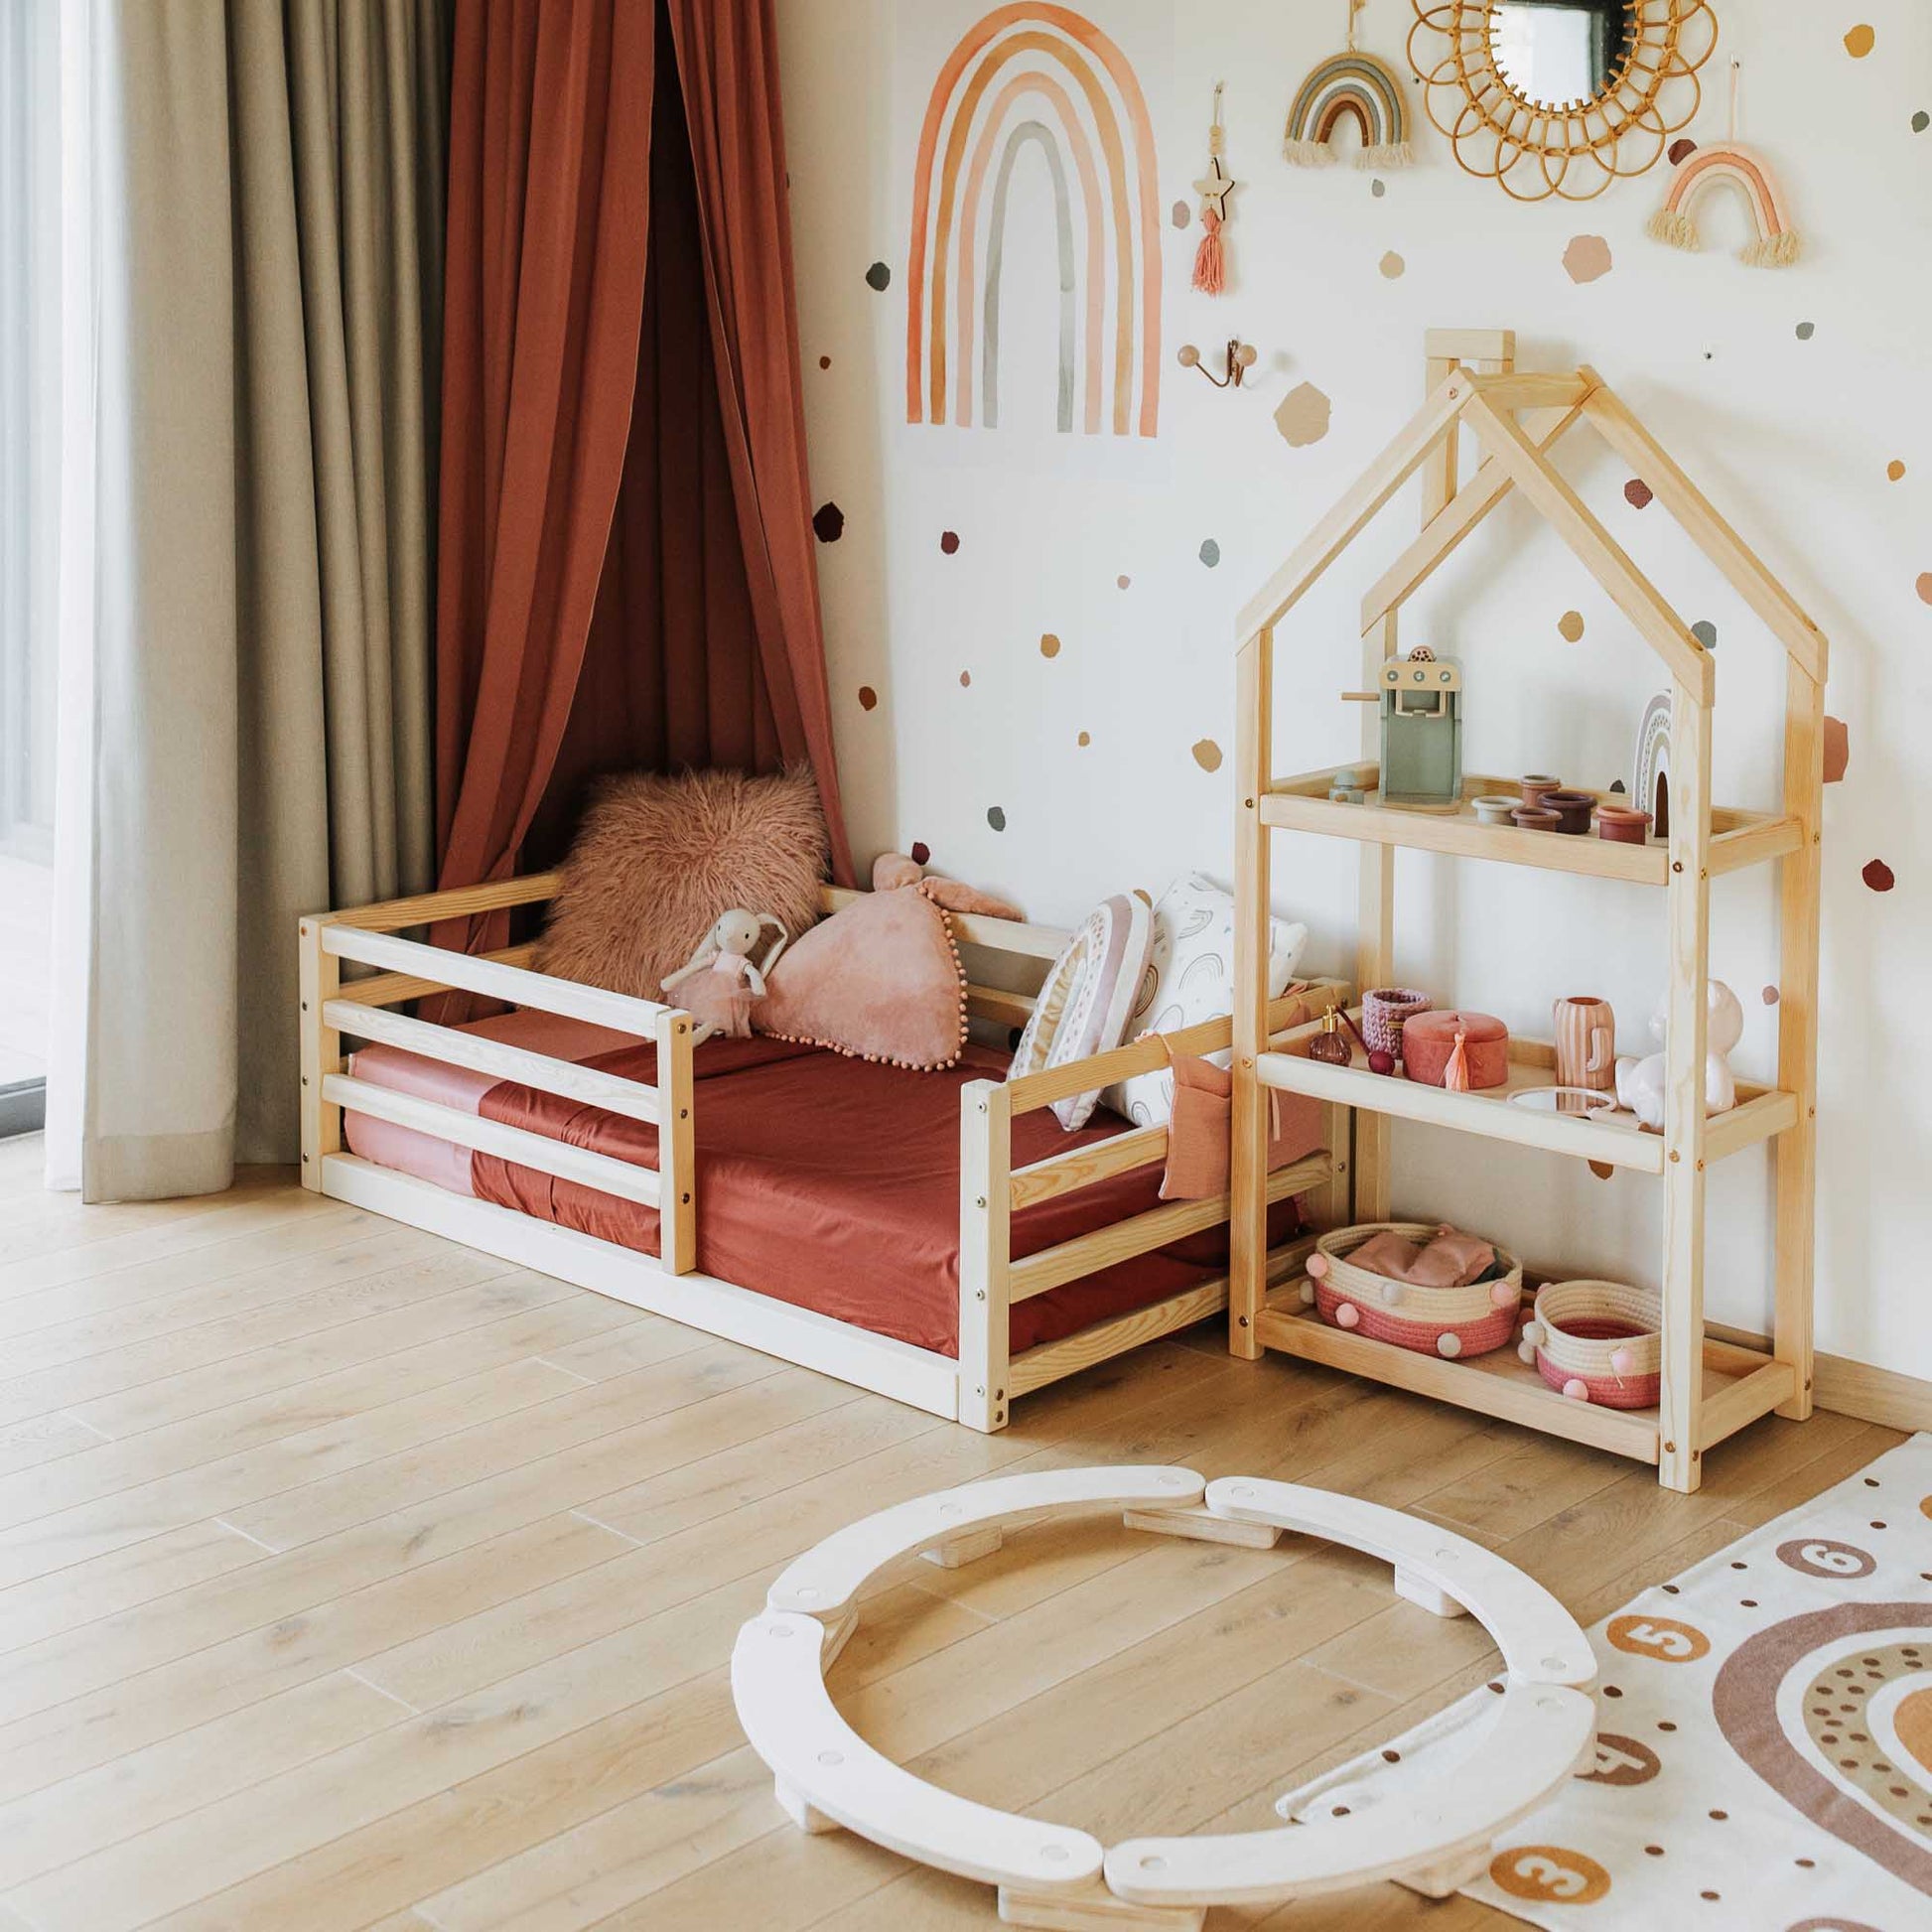 A child's room with a Sweet Home From Wood floor-level kids' bed with a horizontal rail fence, a chair and a rug.